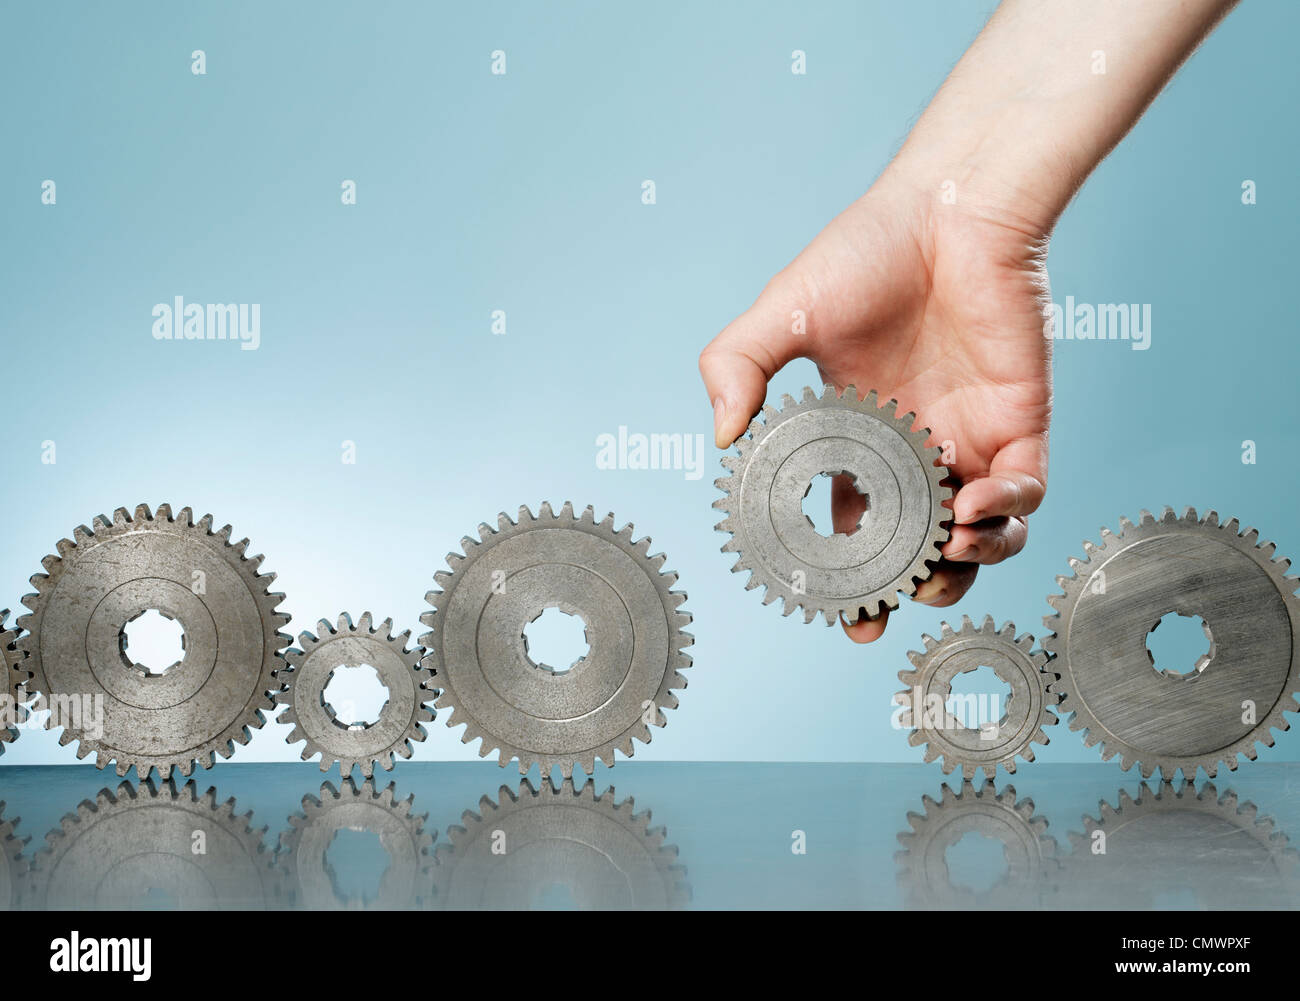 Man adding a cog gear in a row of old cog gears. Stock Photo